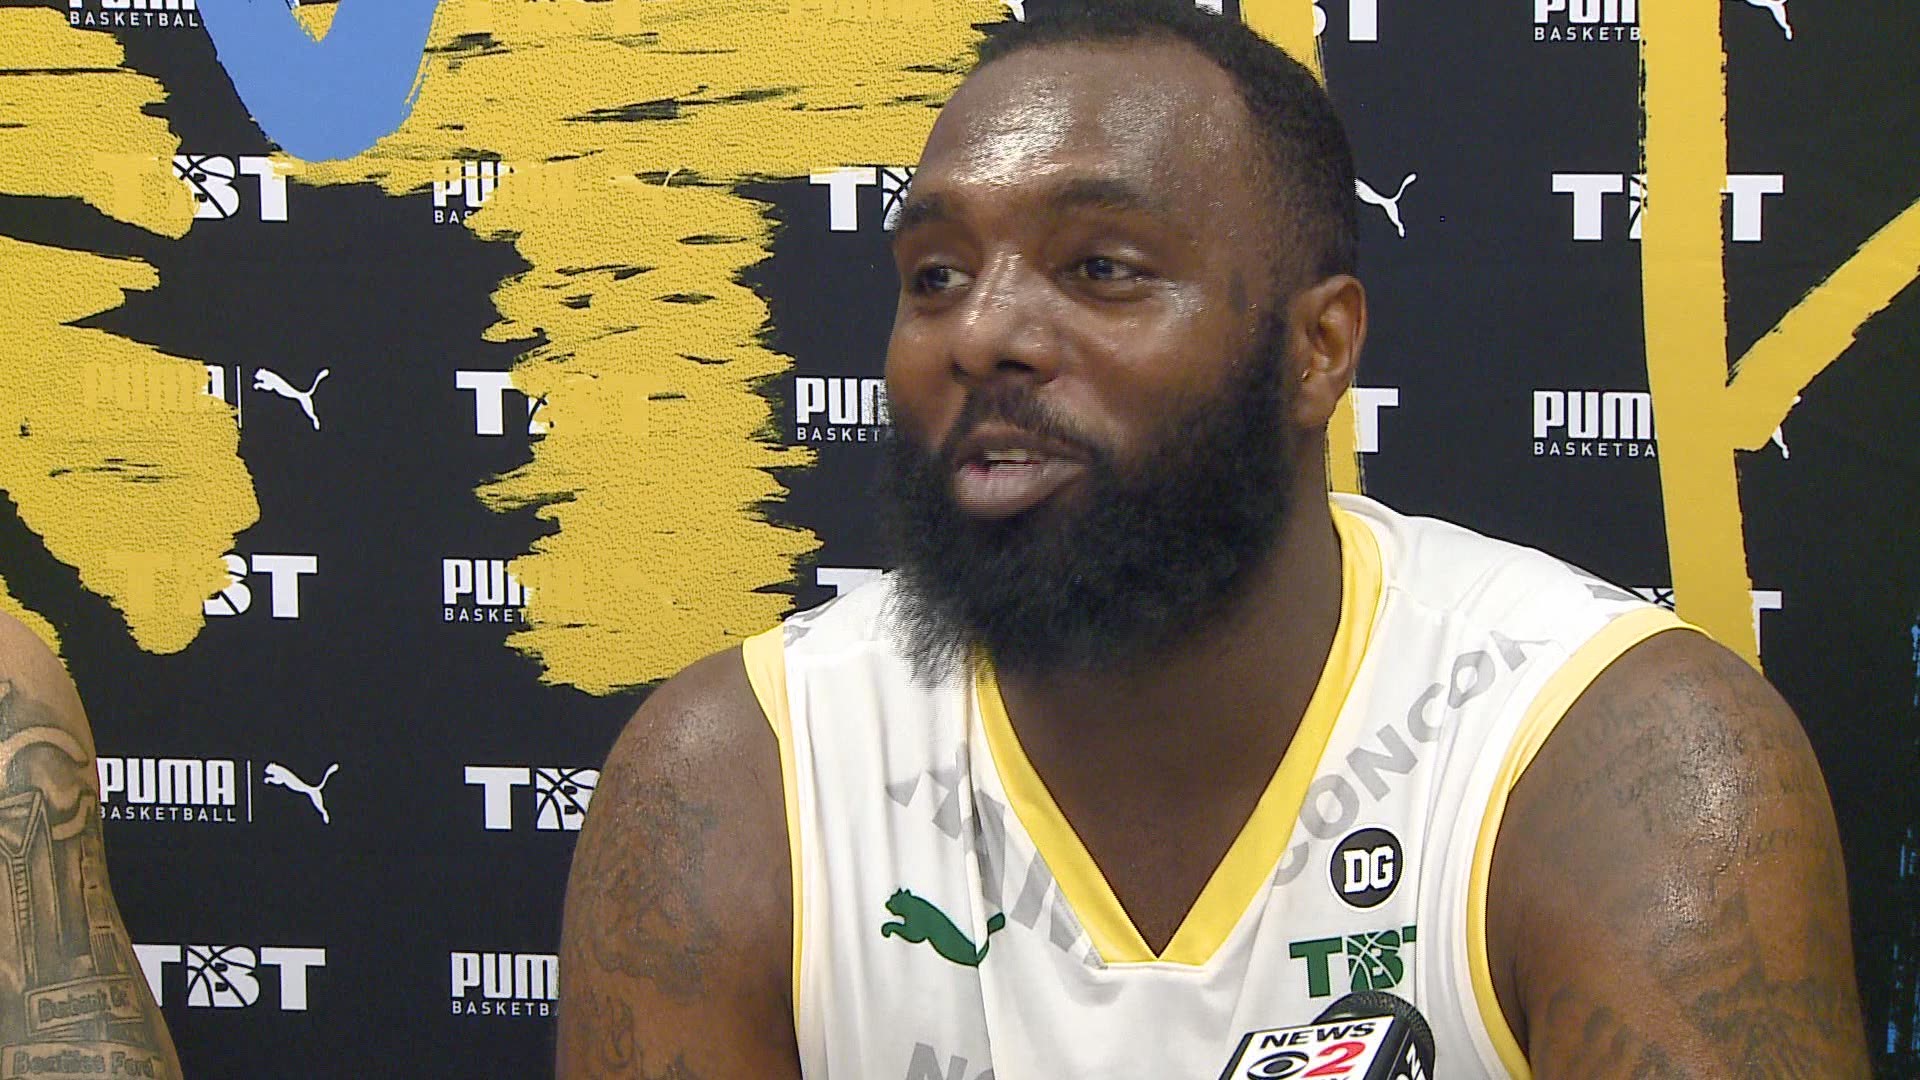 Hairston Finished With 13 Points In the 79-76 Victory